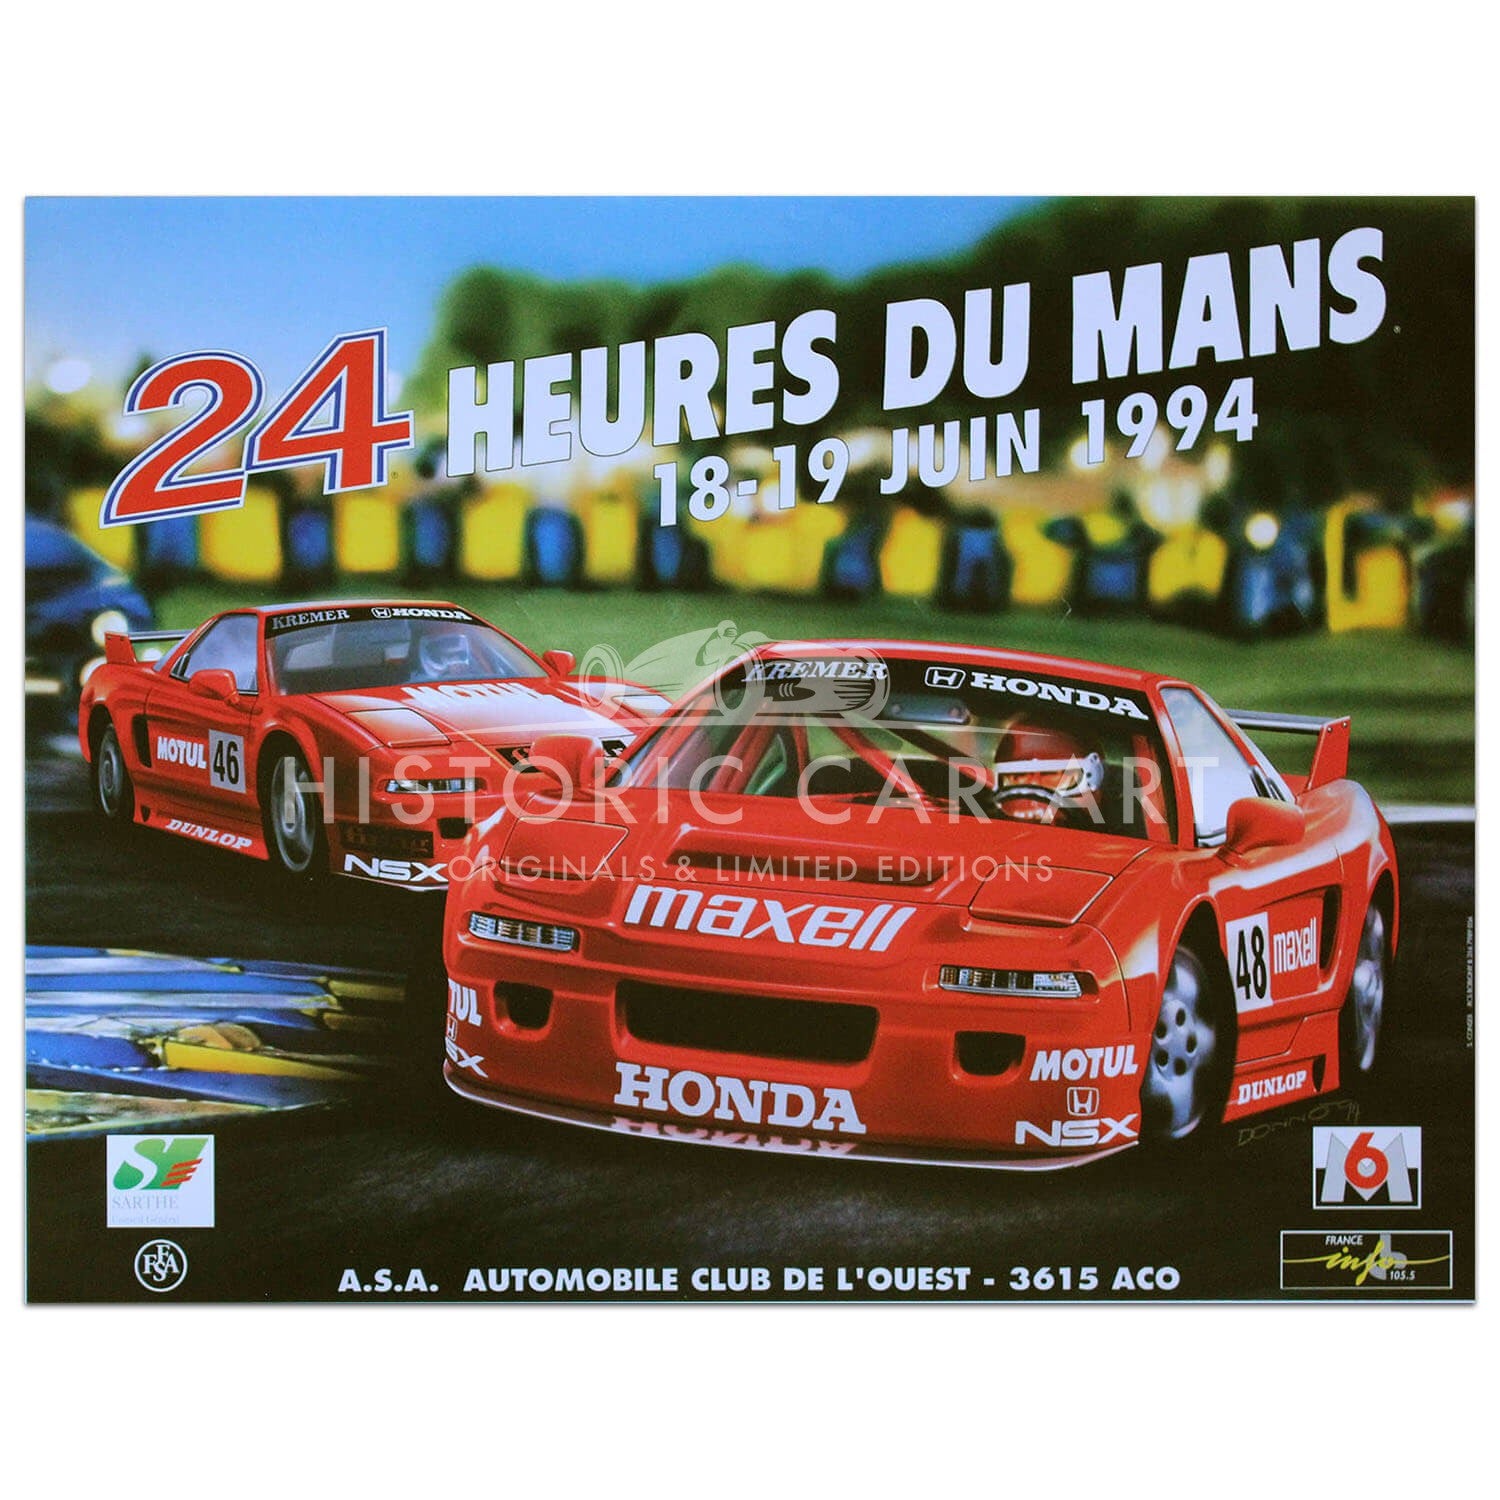 French | Le Mans 24 hours 1994 Original Poster